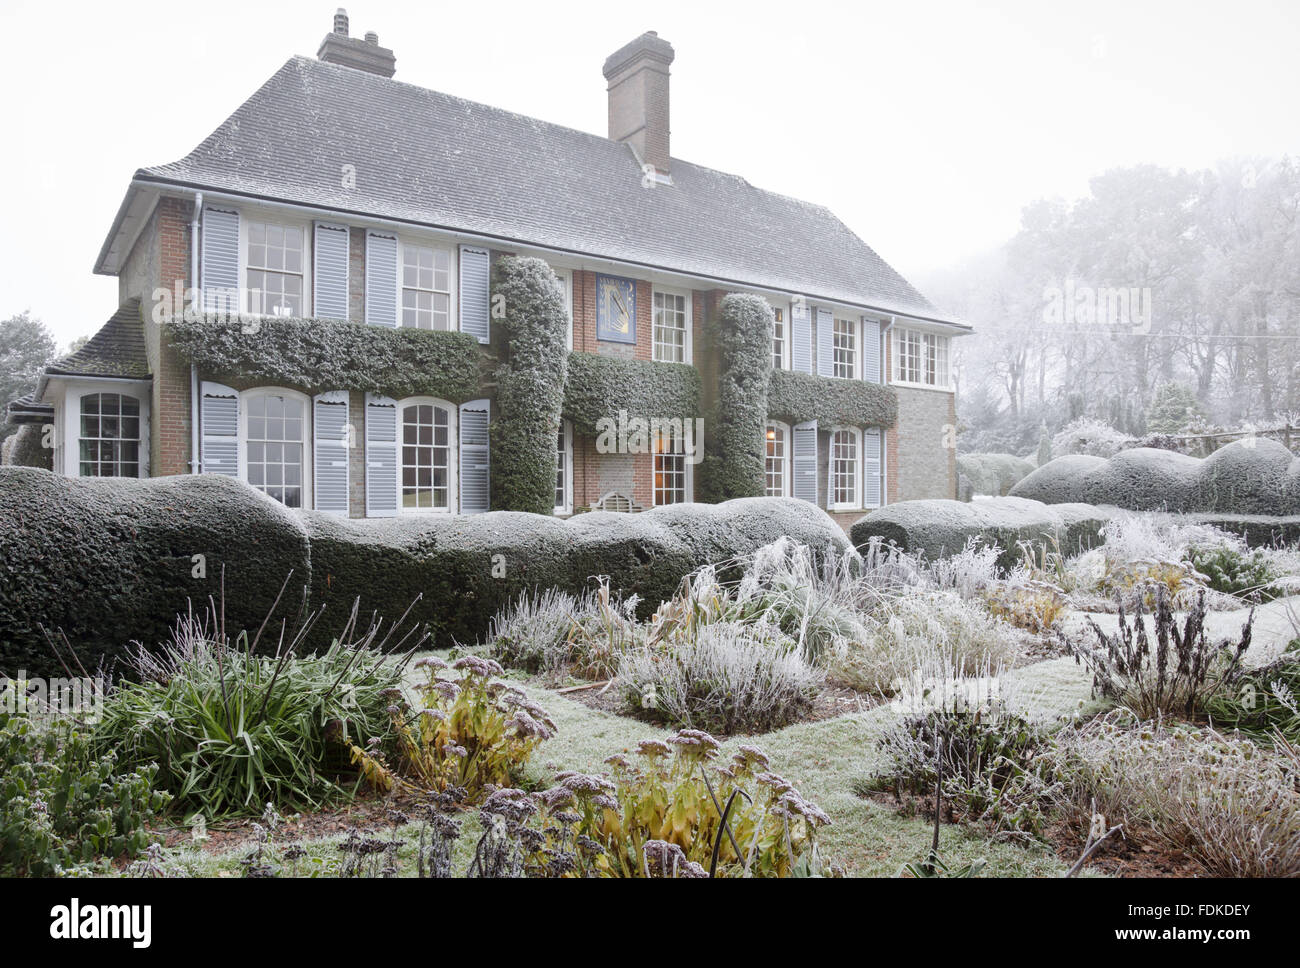 The west front of the house and garden in winter at Nuffield Place, Oxfordshire. The house was designed by Oswald Partridge Milne, a pupil of Lutyens, and built in 1914. Nuffield Place was the home of William Morris, Lord Nuffield, motor manufacturer, fro Stock Photo